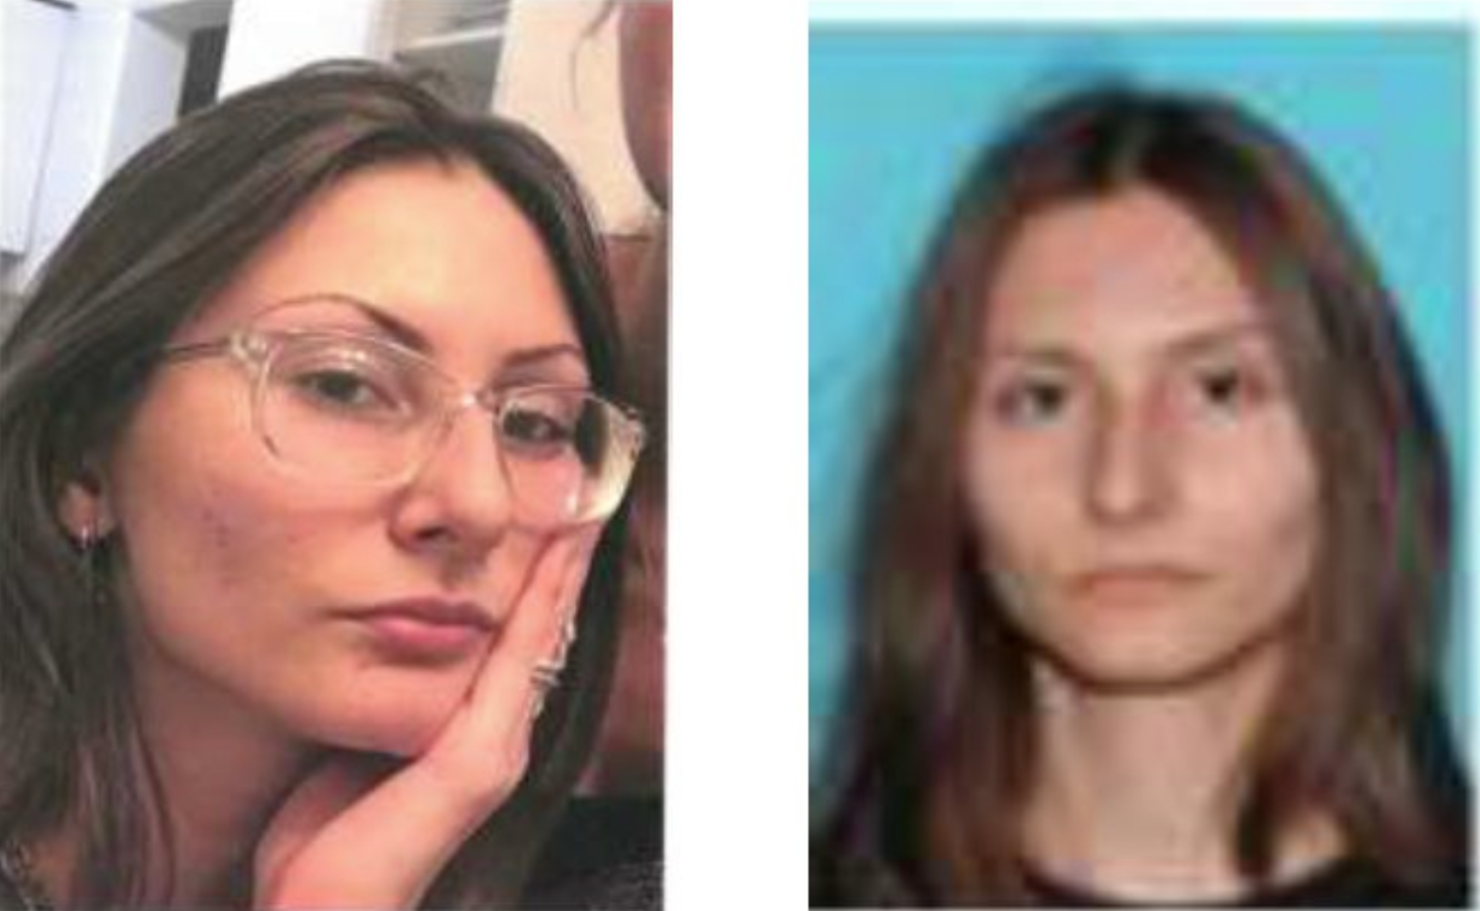 Massive manhunt underway for woman who made threats in Colorado